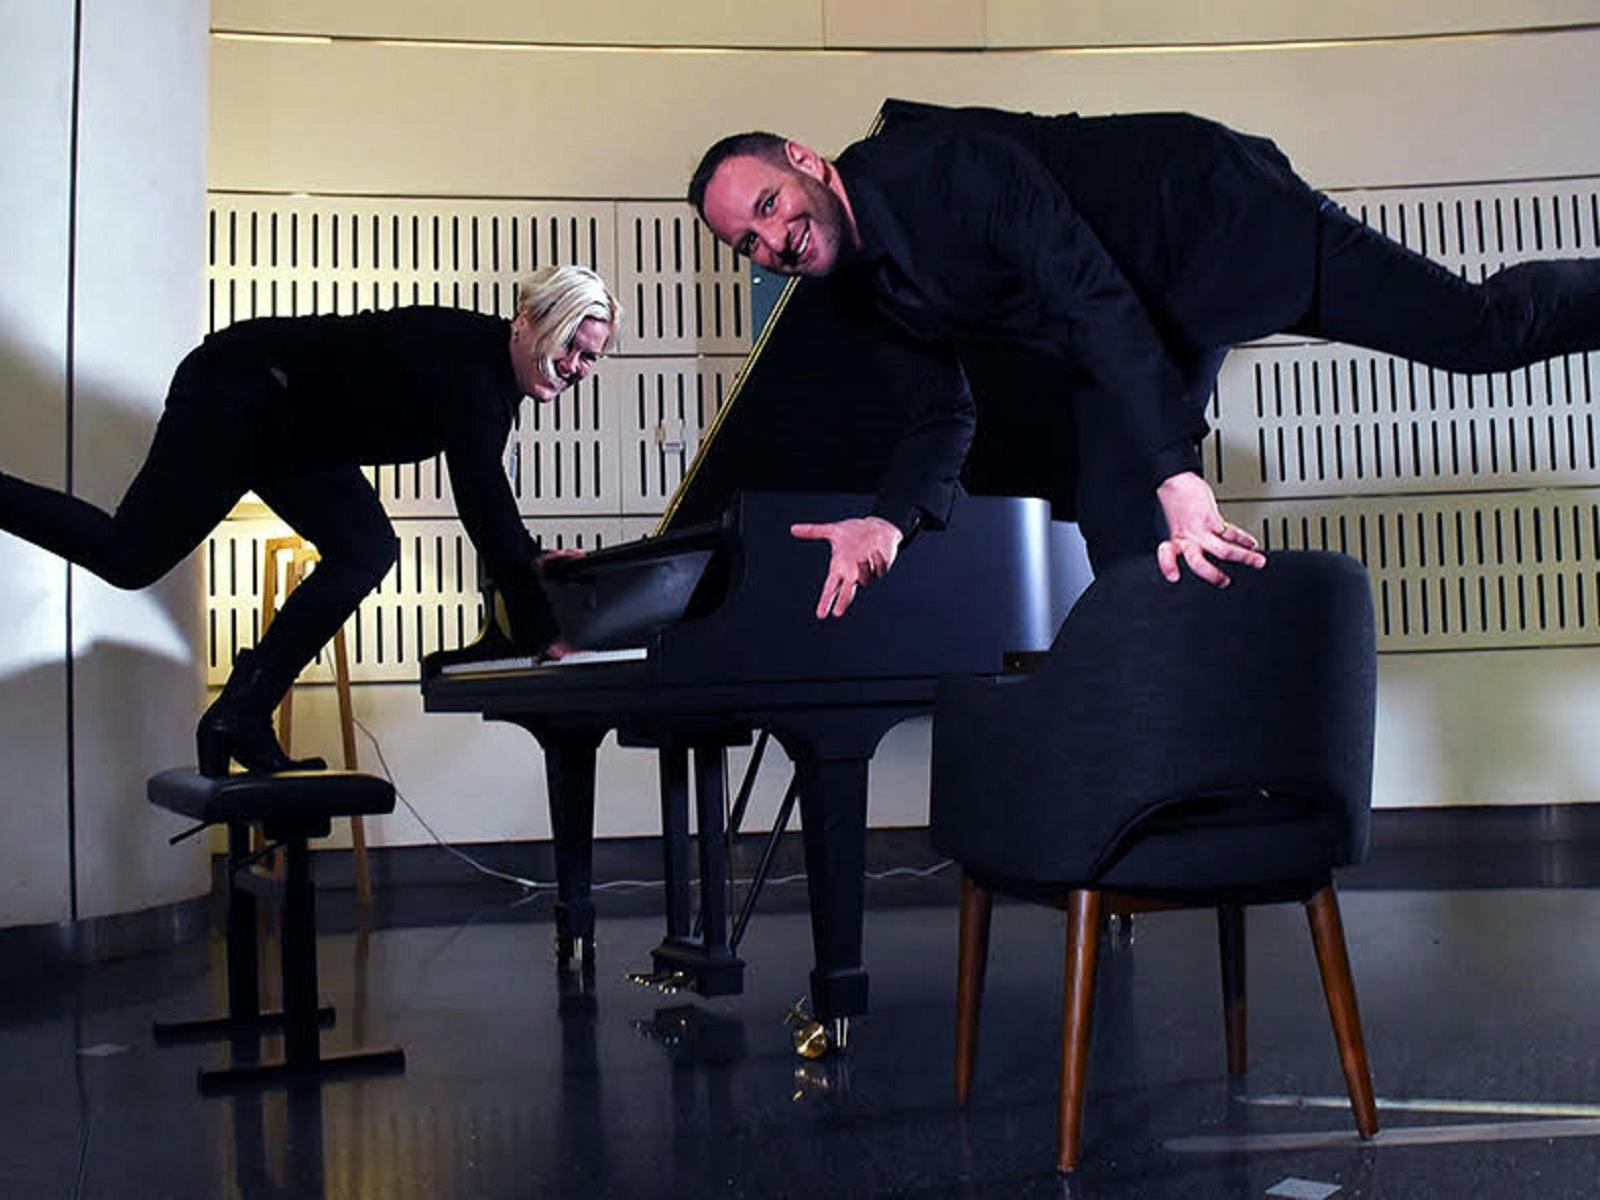 Singer and pianist standing on chairs on one leg